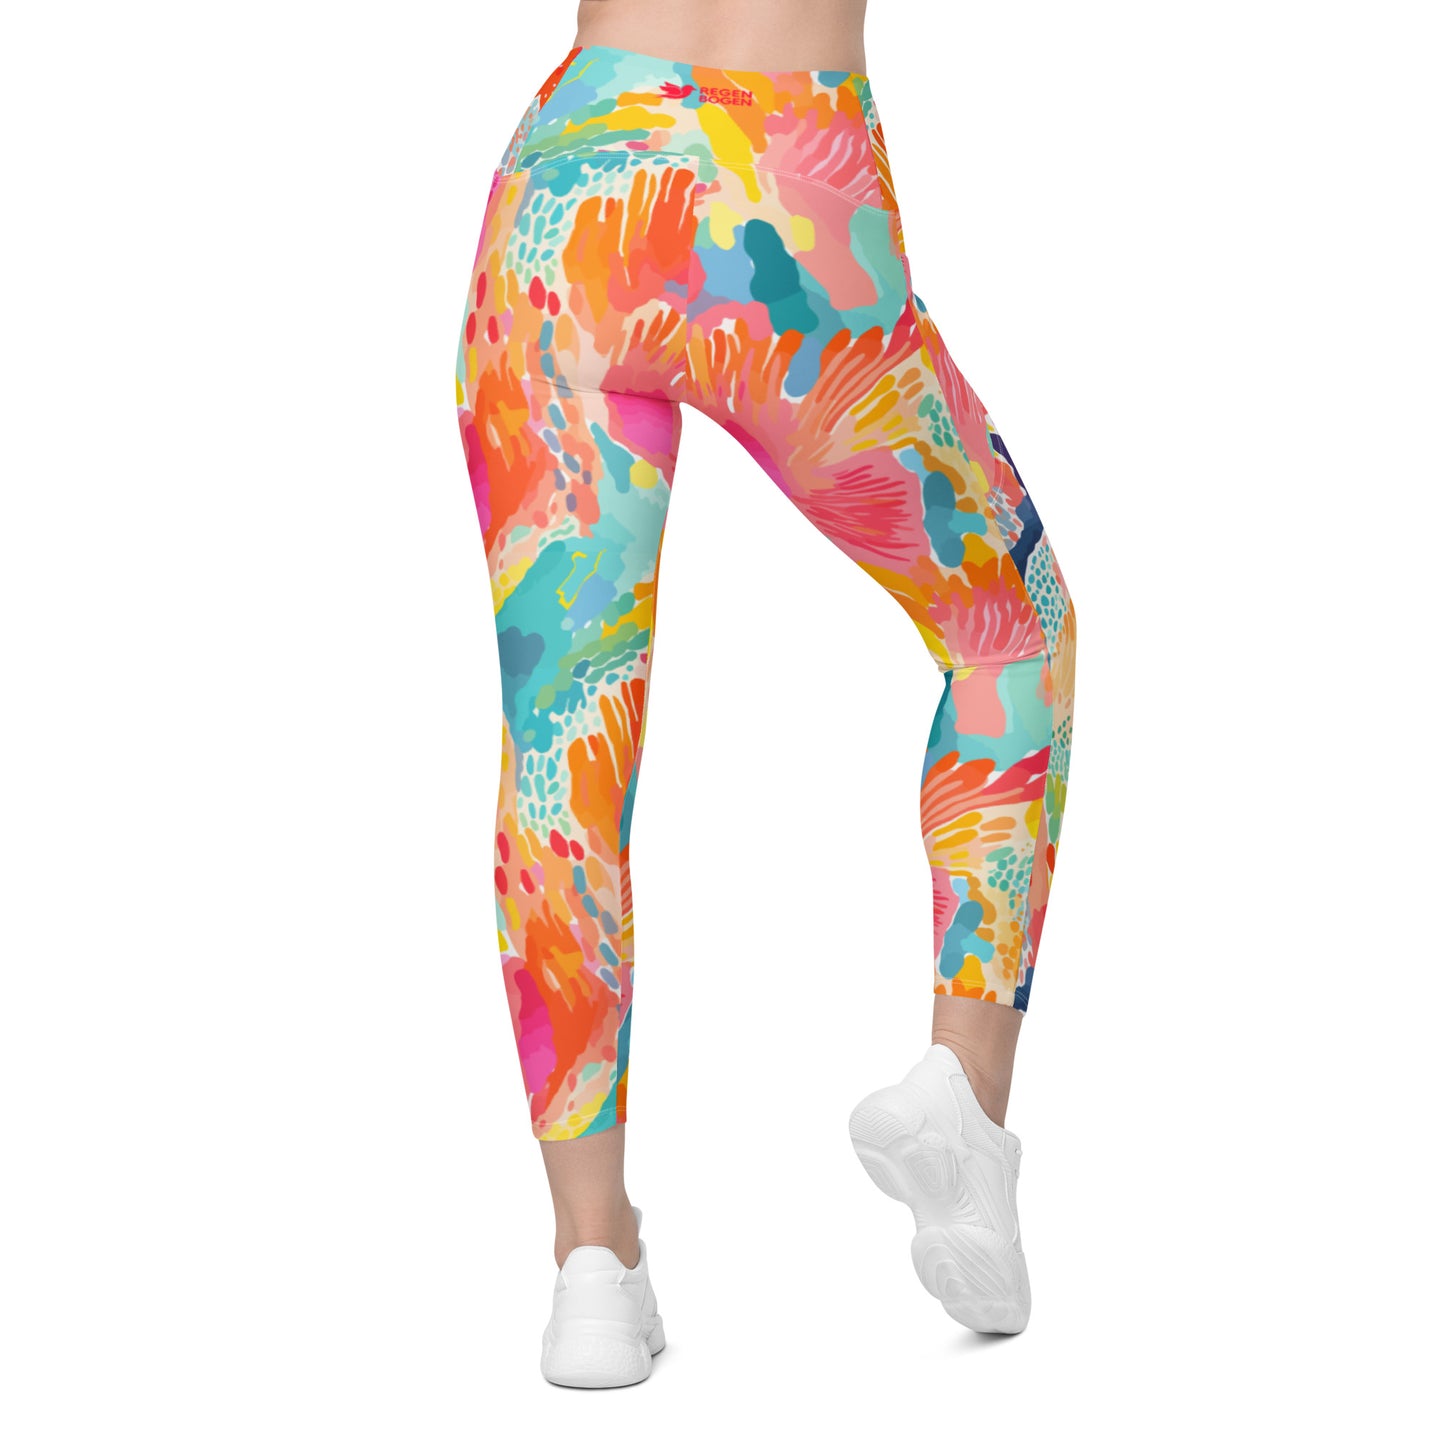 Coralo Crossover Waist 7/8 Recycled Yoga Leggings / Yoga Pants with Pockets